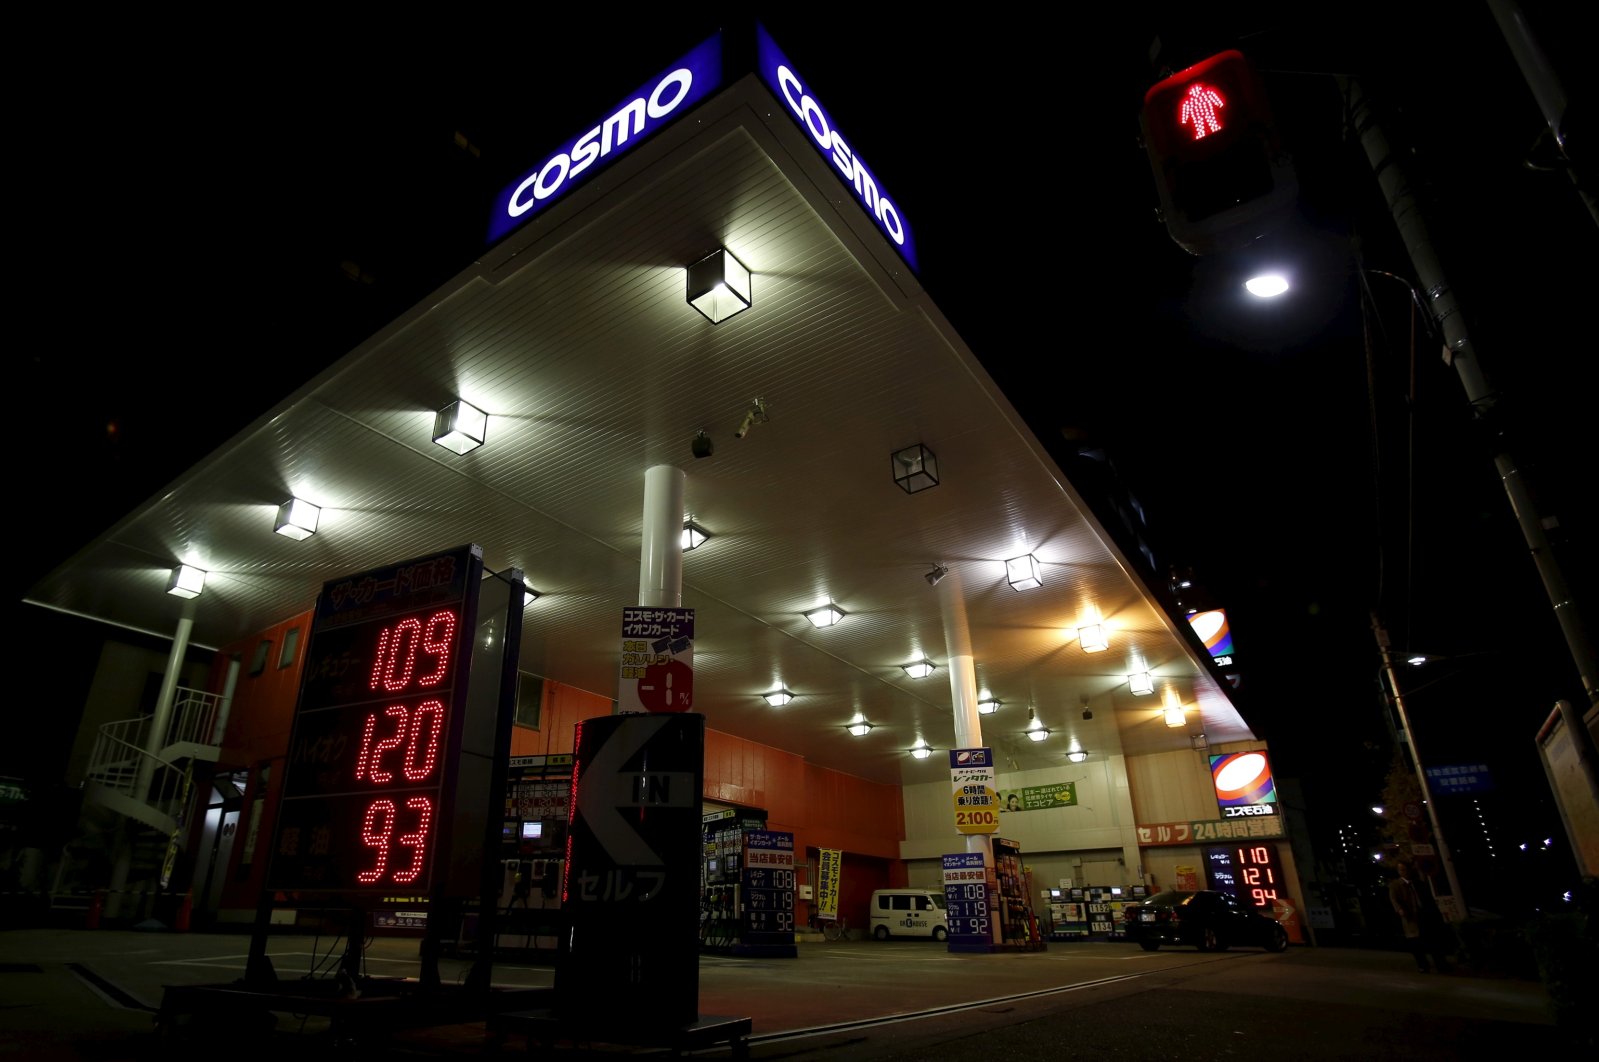  A branch of Cosmo Energy Holdings&#039; Cosmo Oil service station is seen in Tokyo, Japan, Dec. 17, 2015. (Reuters Photo) 